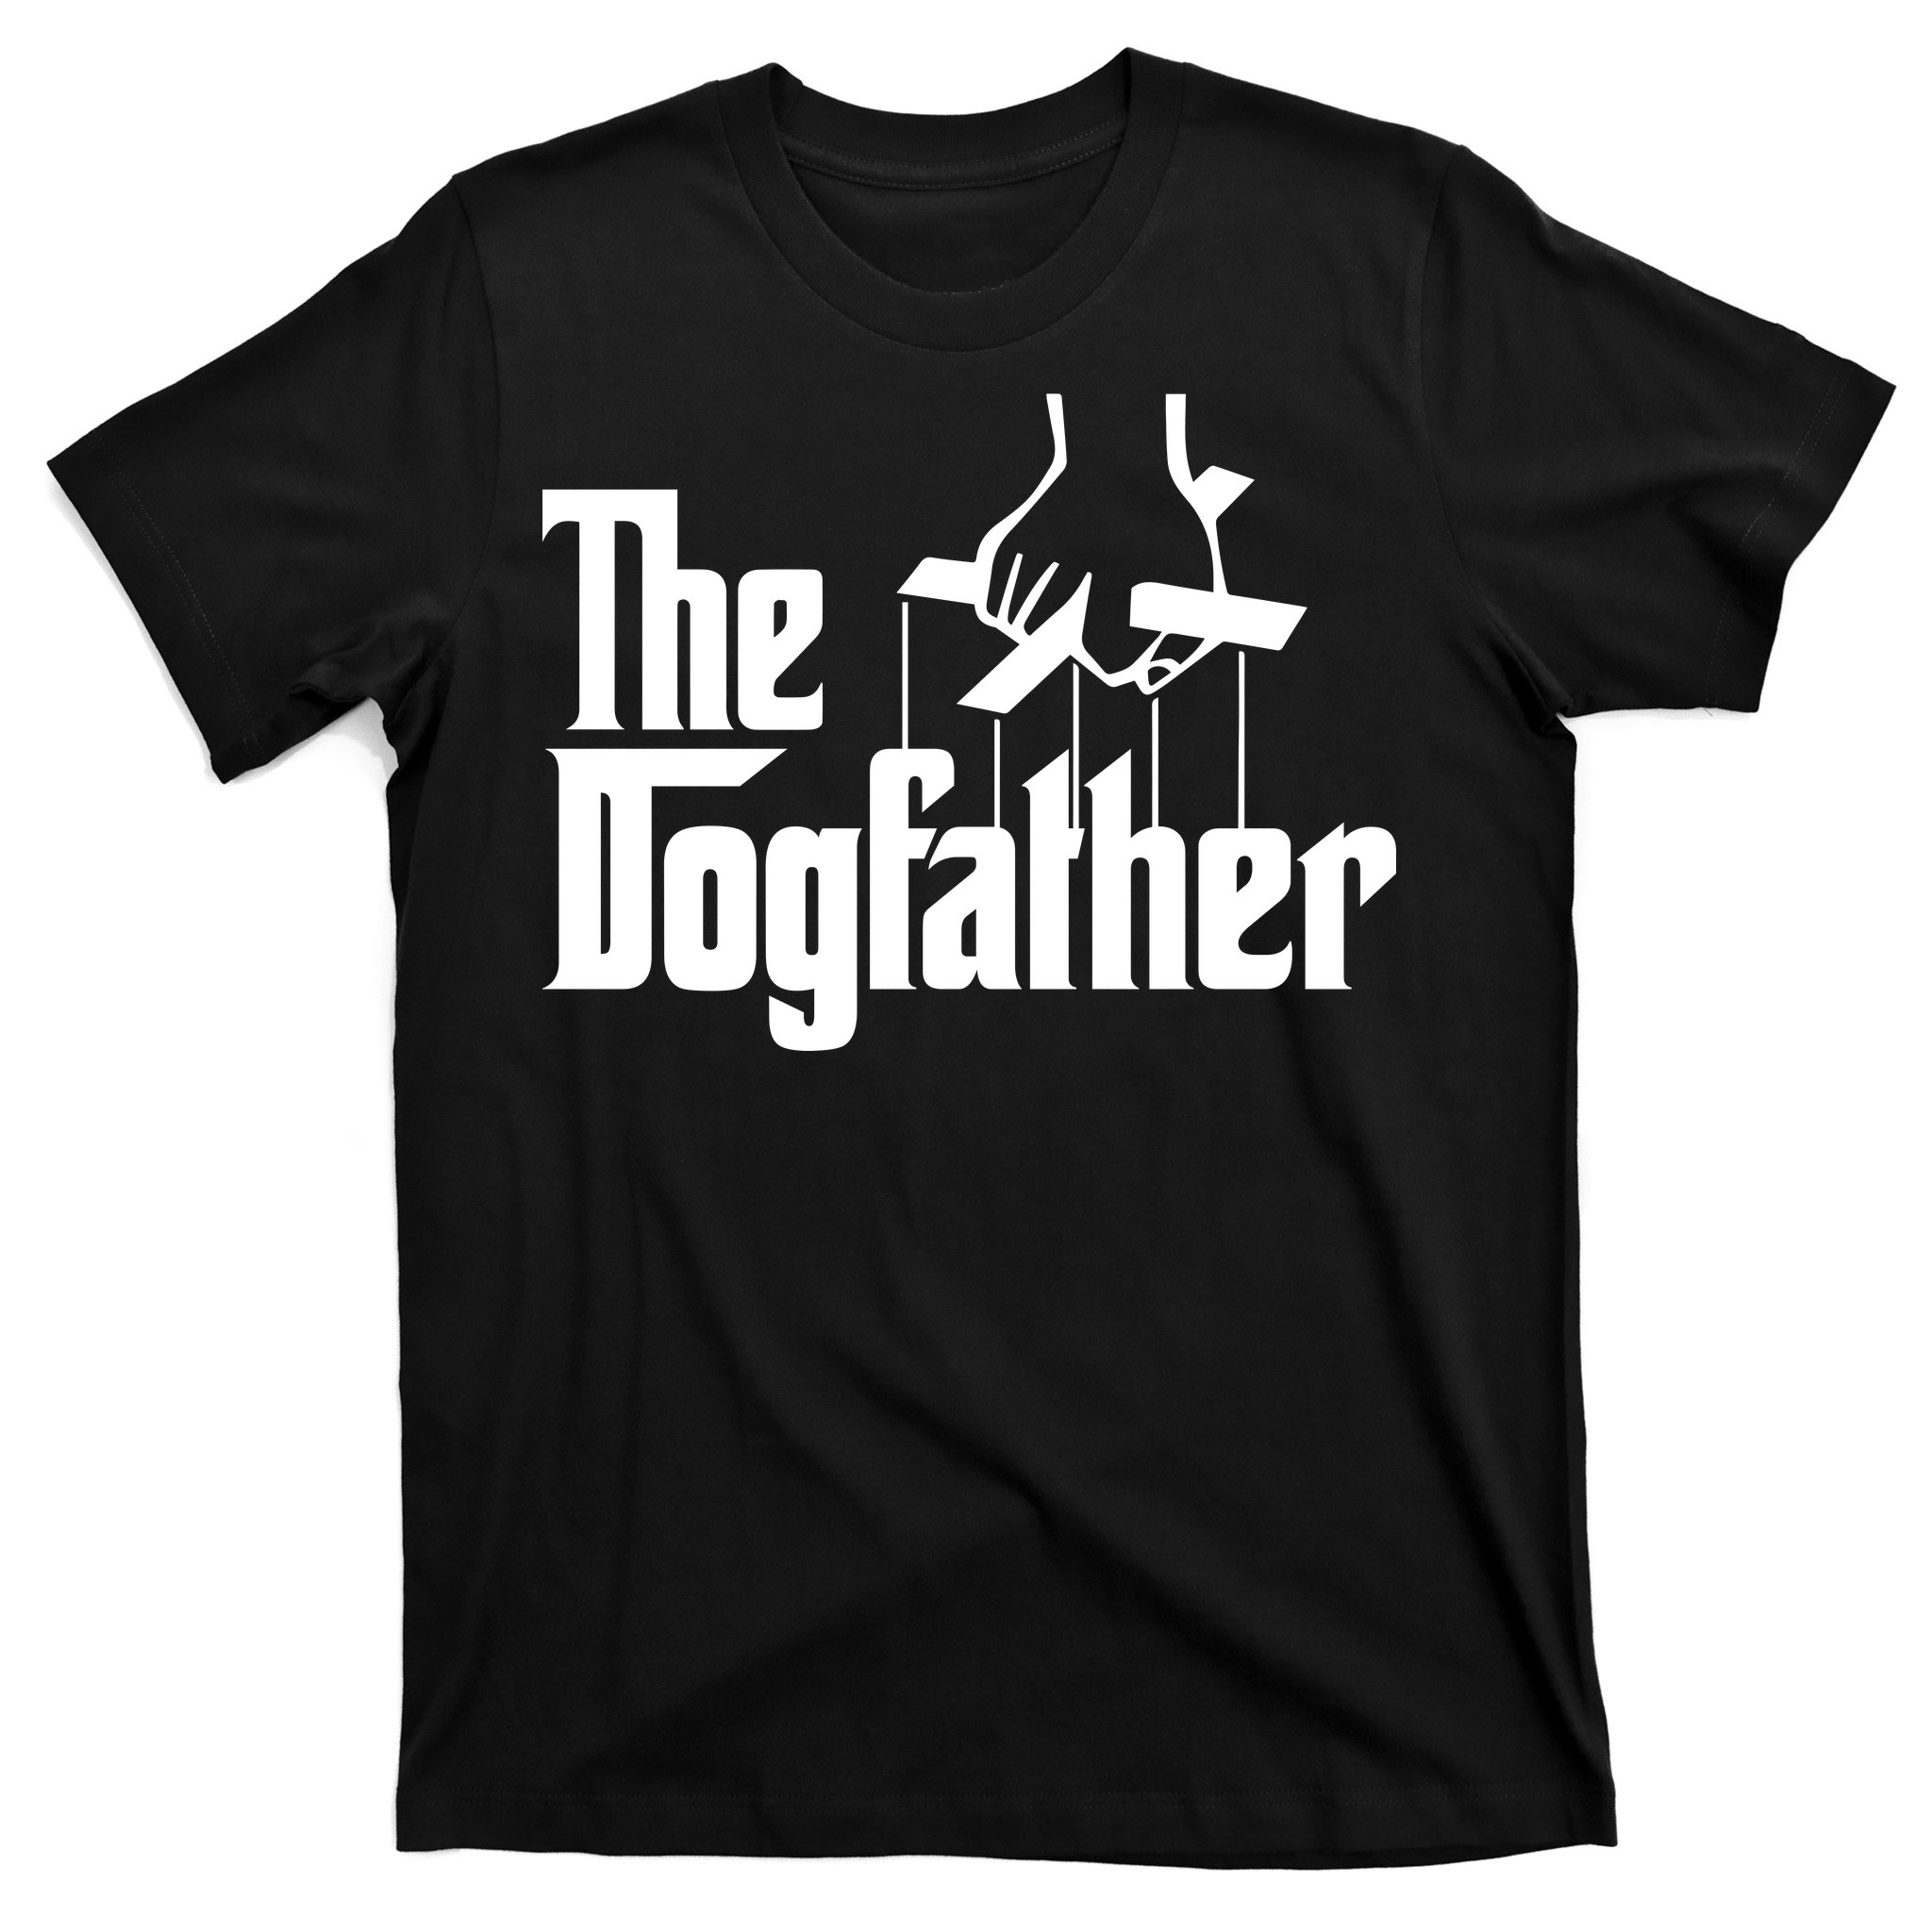 The Dog Father Boston Terrier Funny Dad T-Shirt S Med L XL XXL 3XL Men's 693 